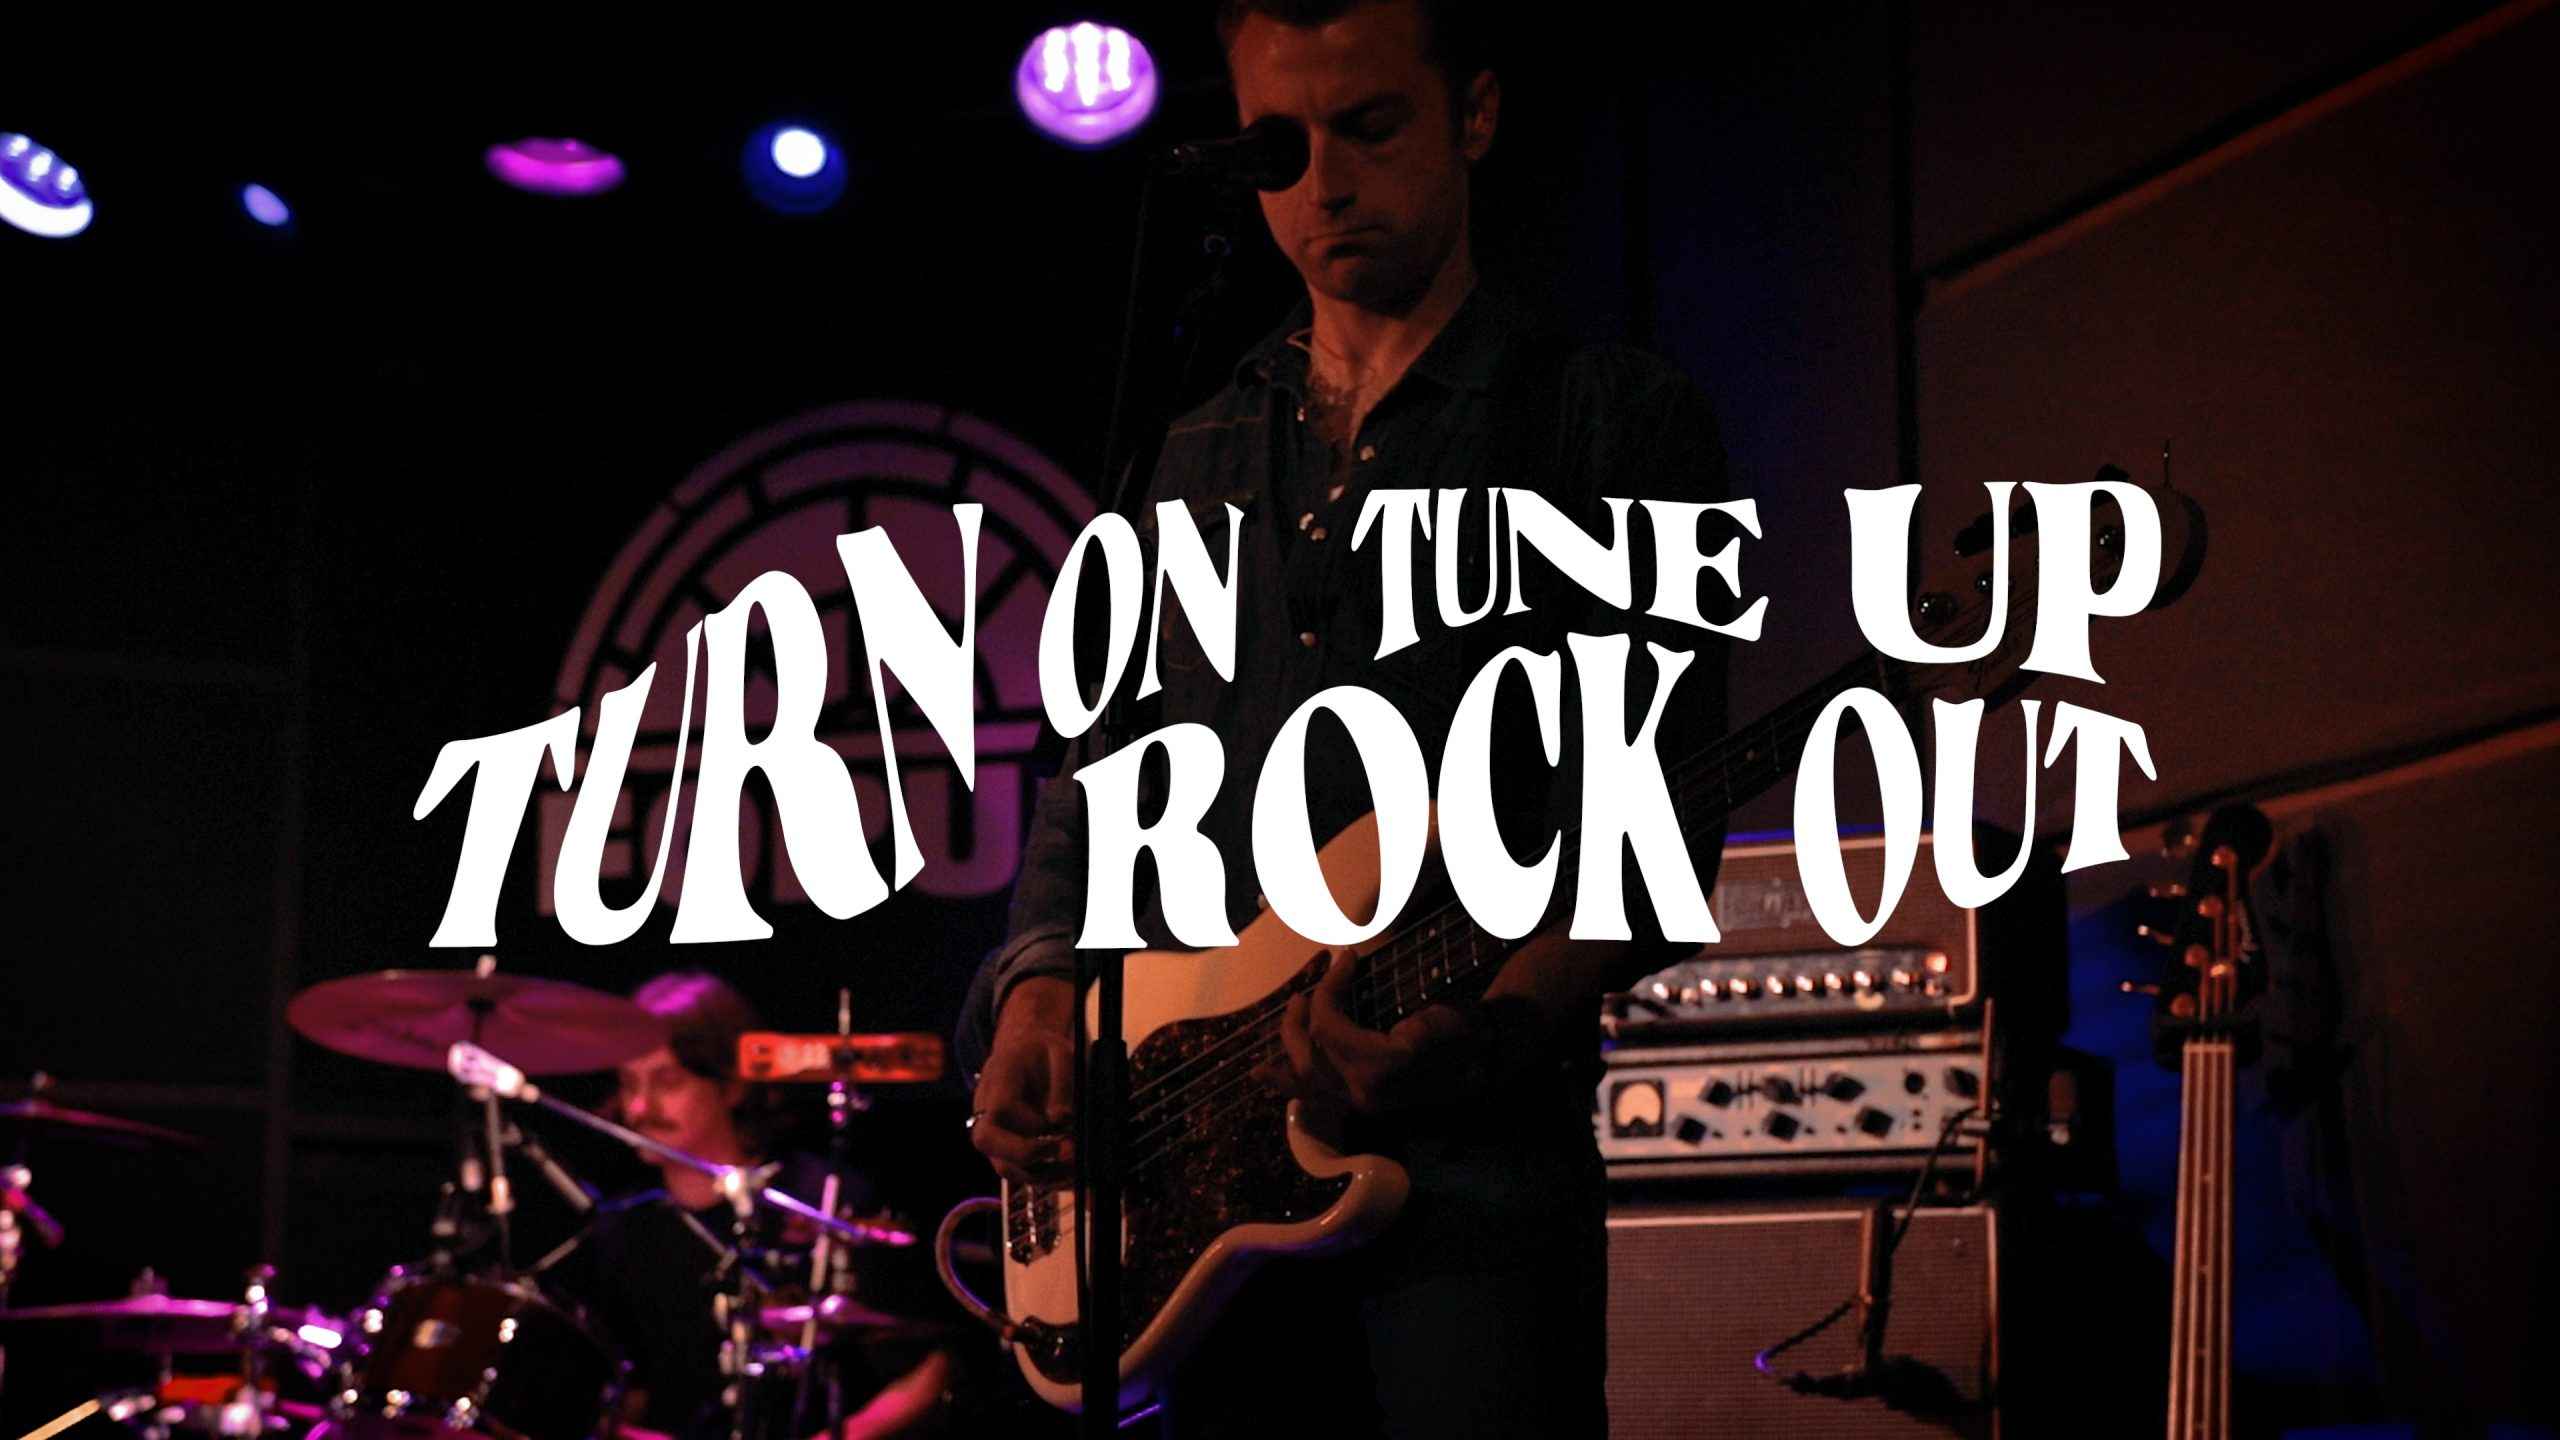 Black Honey Tommy with Rotosound Turn On Tune Up Rock Out logo